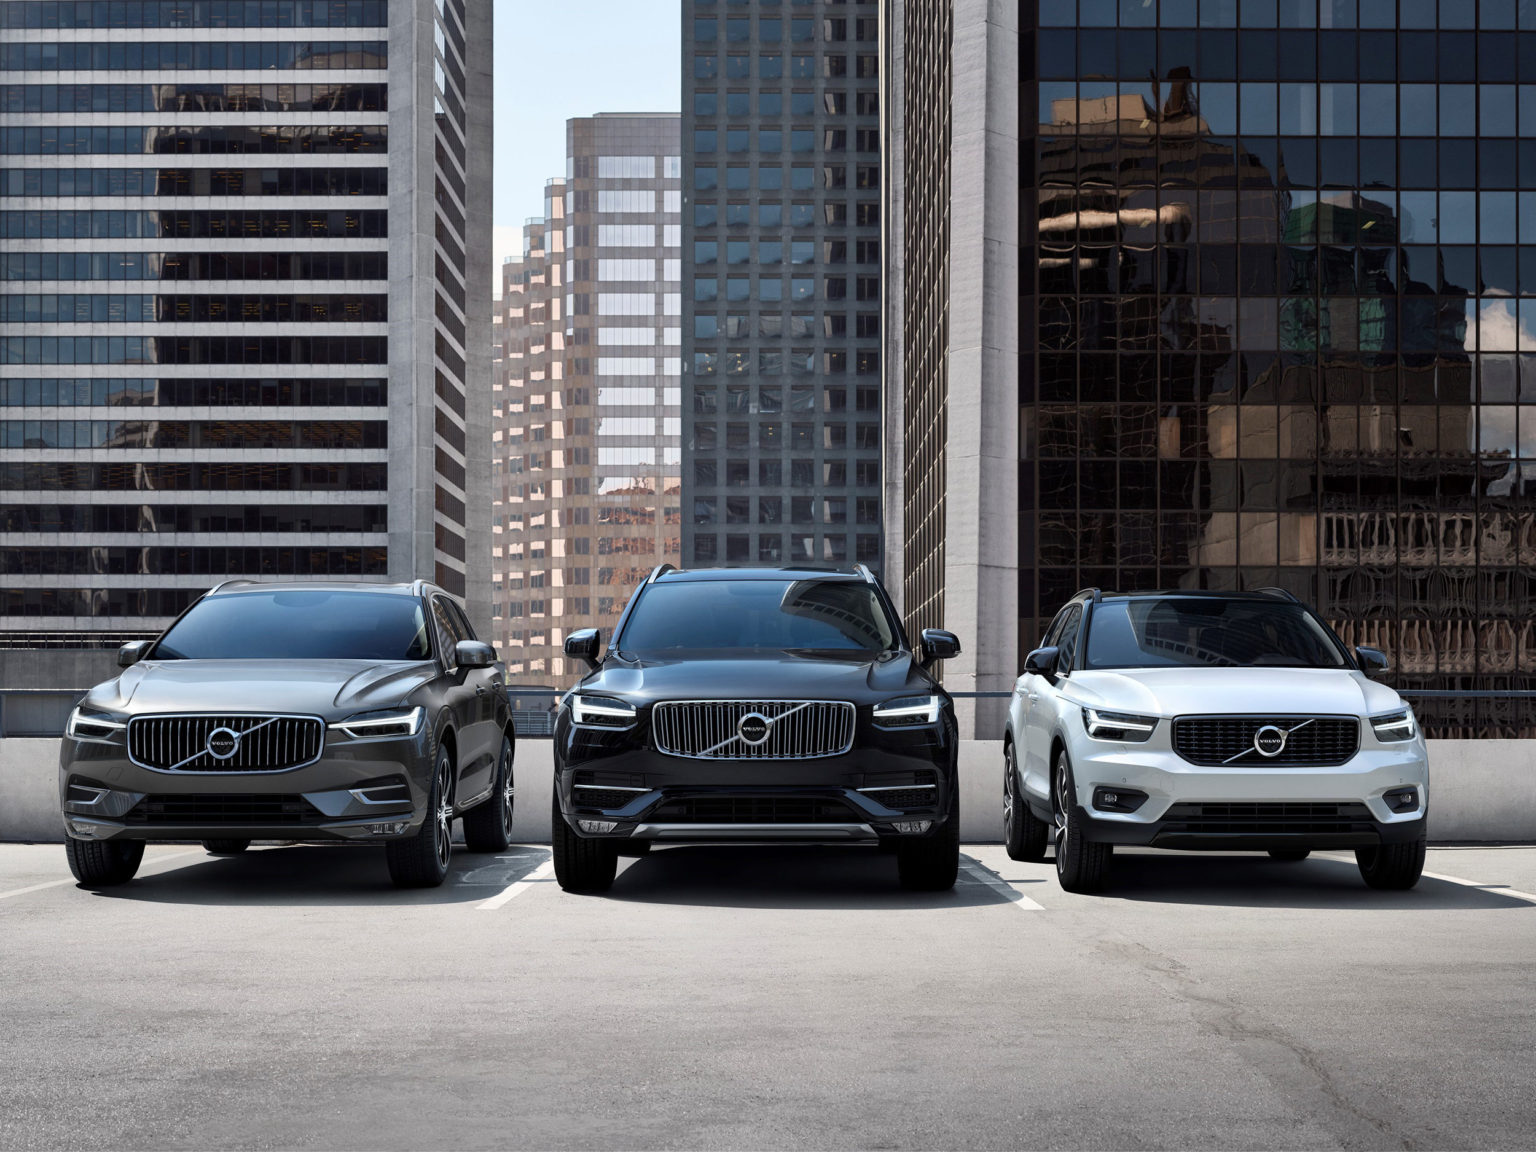 Volvo Valet delivers a luxury level experience for owners.